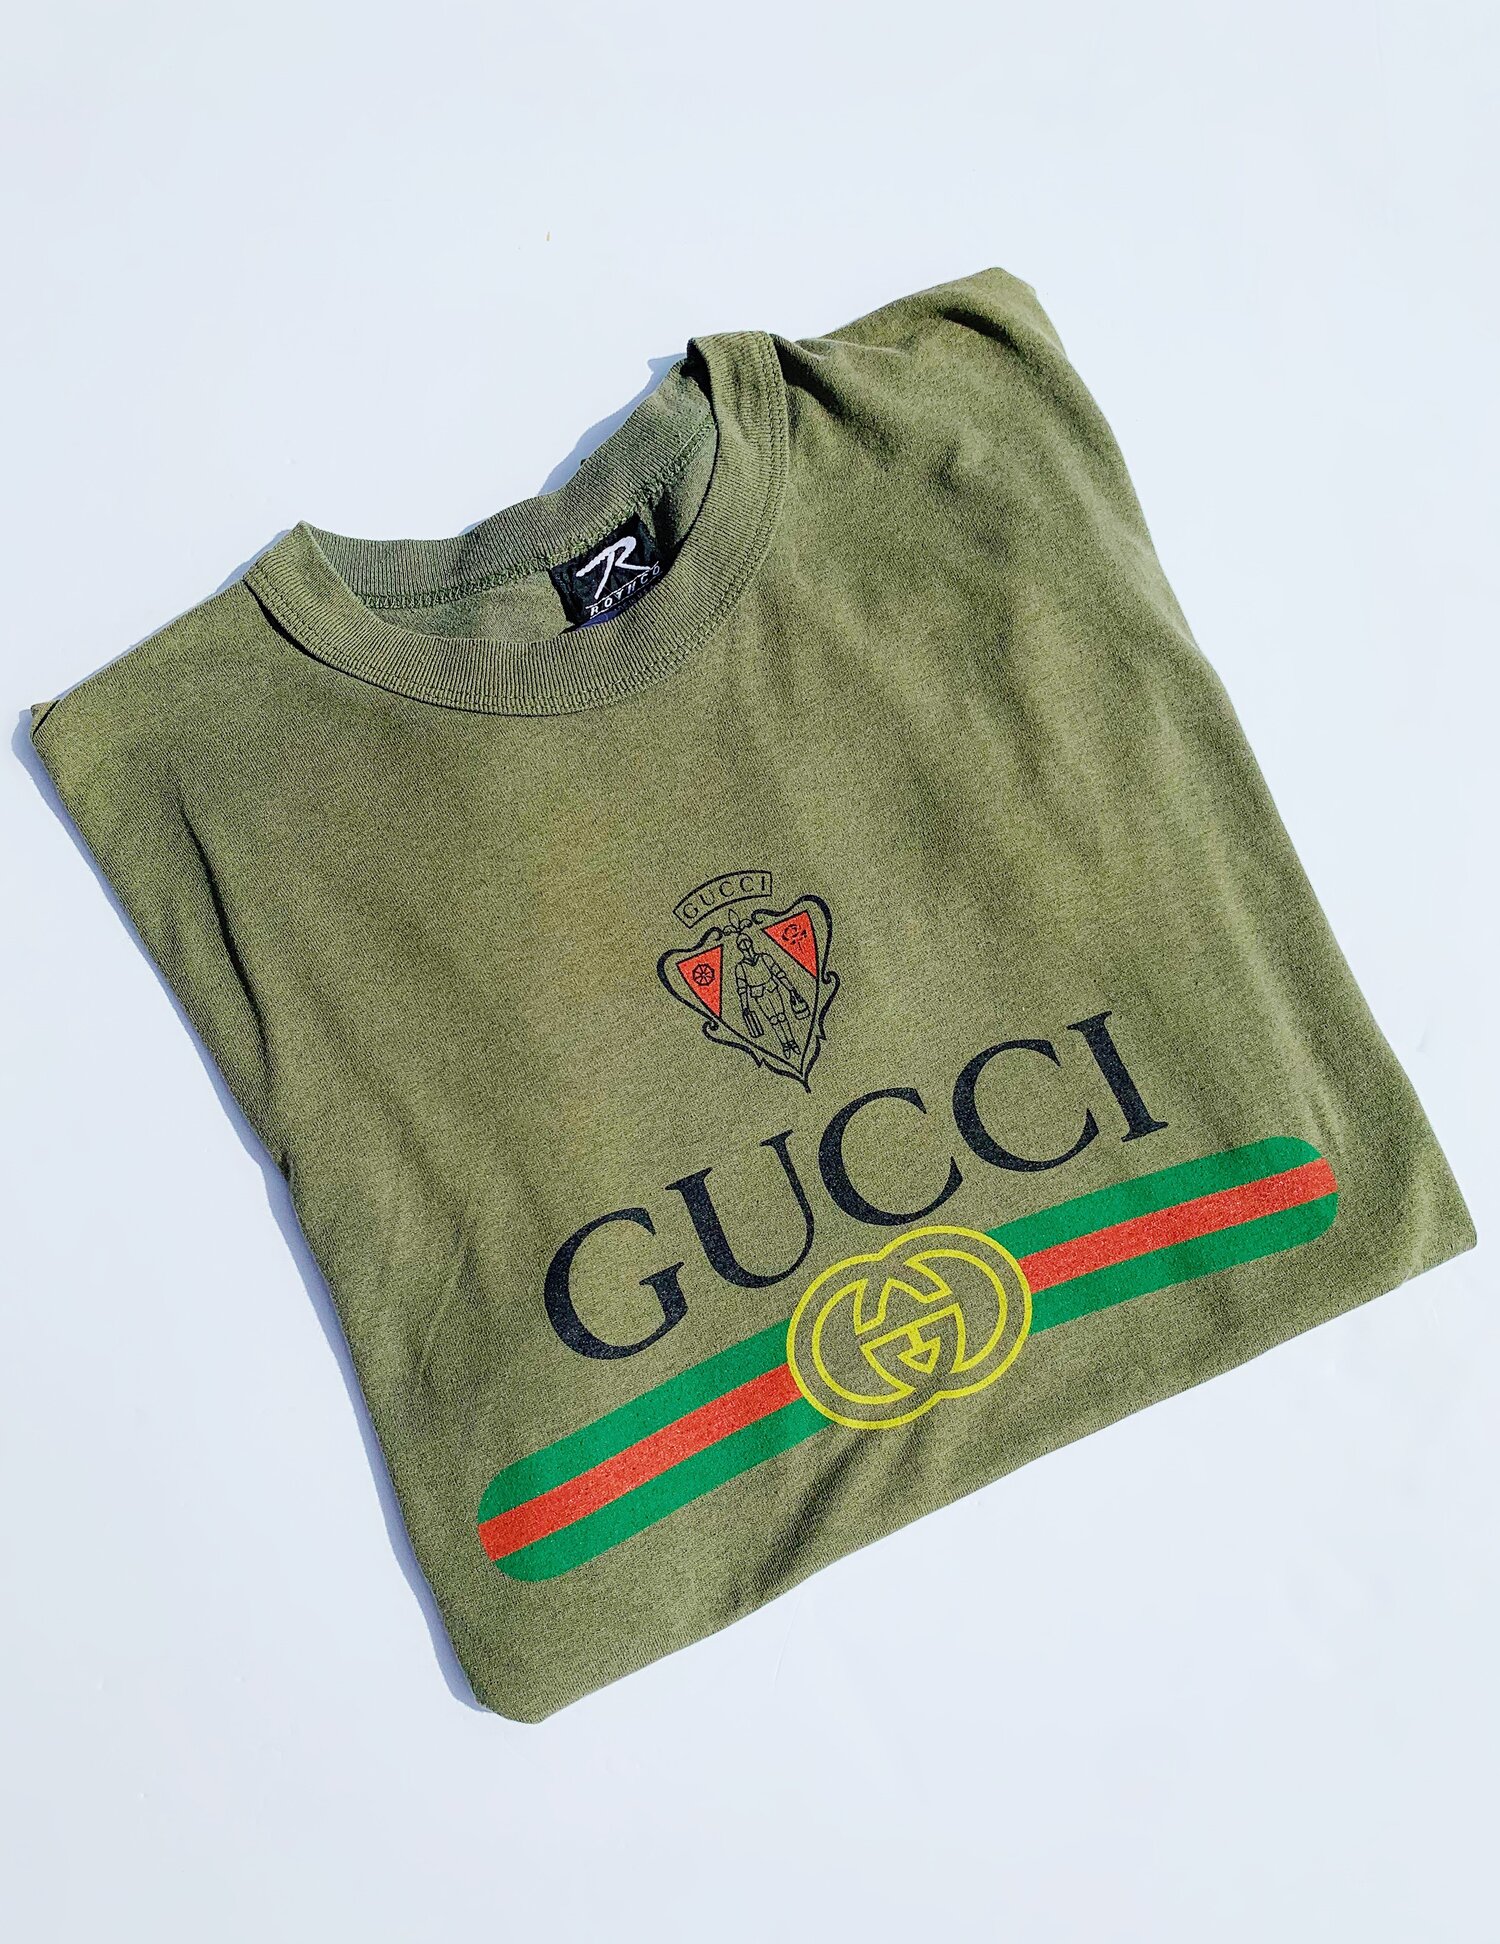 80's 90's Vintage GUCCI Bootleg Striped T Shirt In Rare 3XL Size With  TEEJAYS Tag - BIDSTITCH